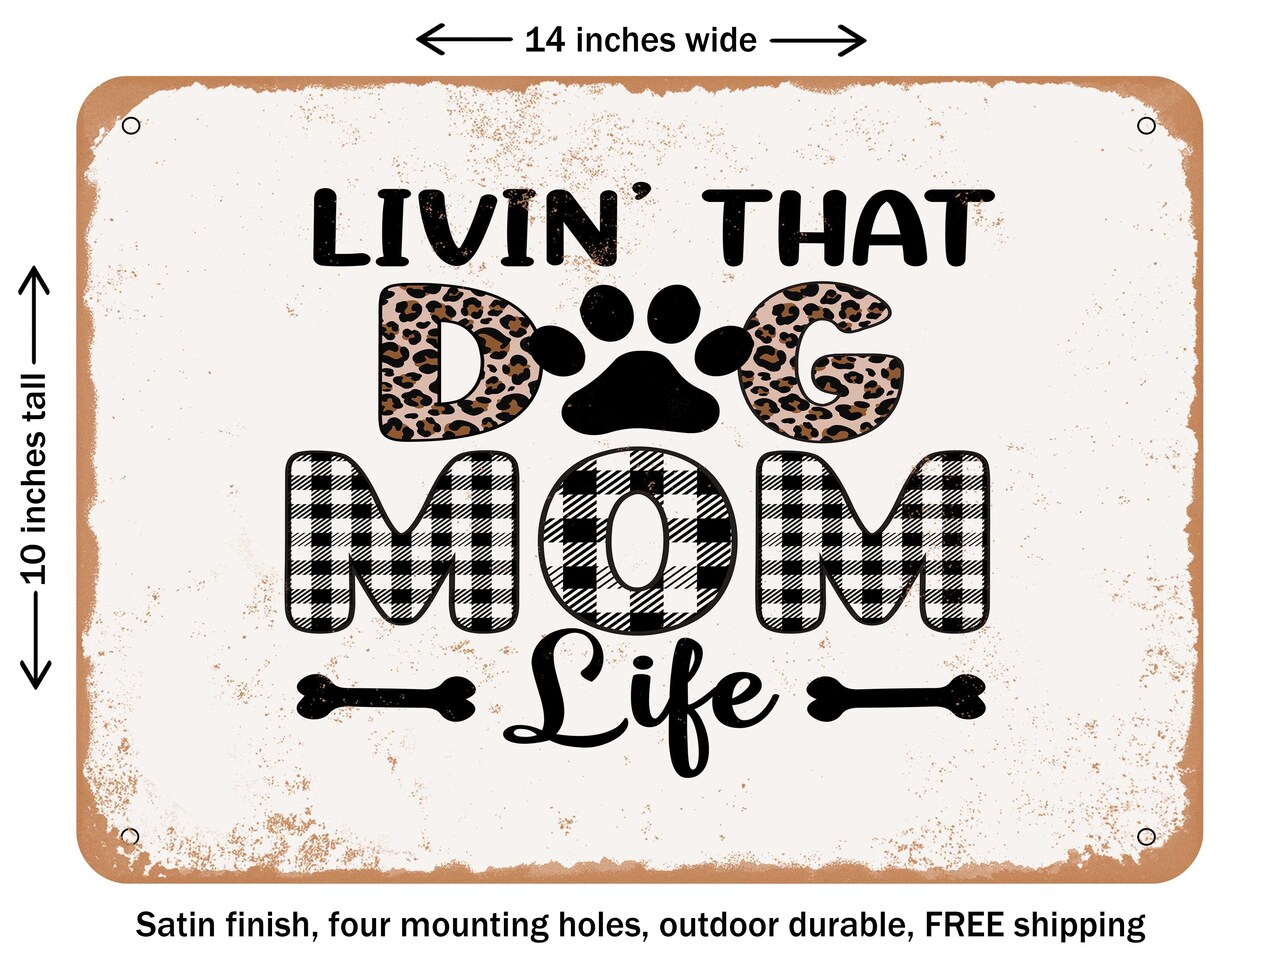 DECORATIVE METAL SIGN - Livin That Dog Mom Life - Vintage Rusty Look